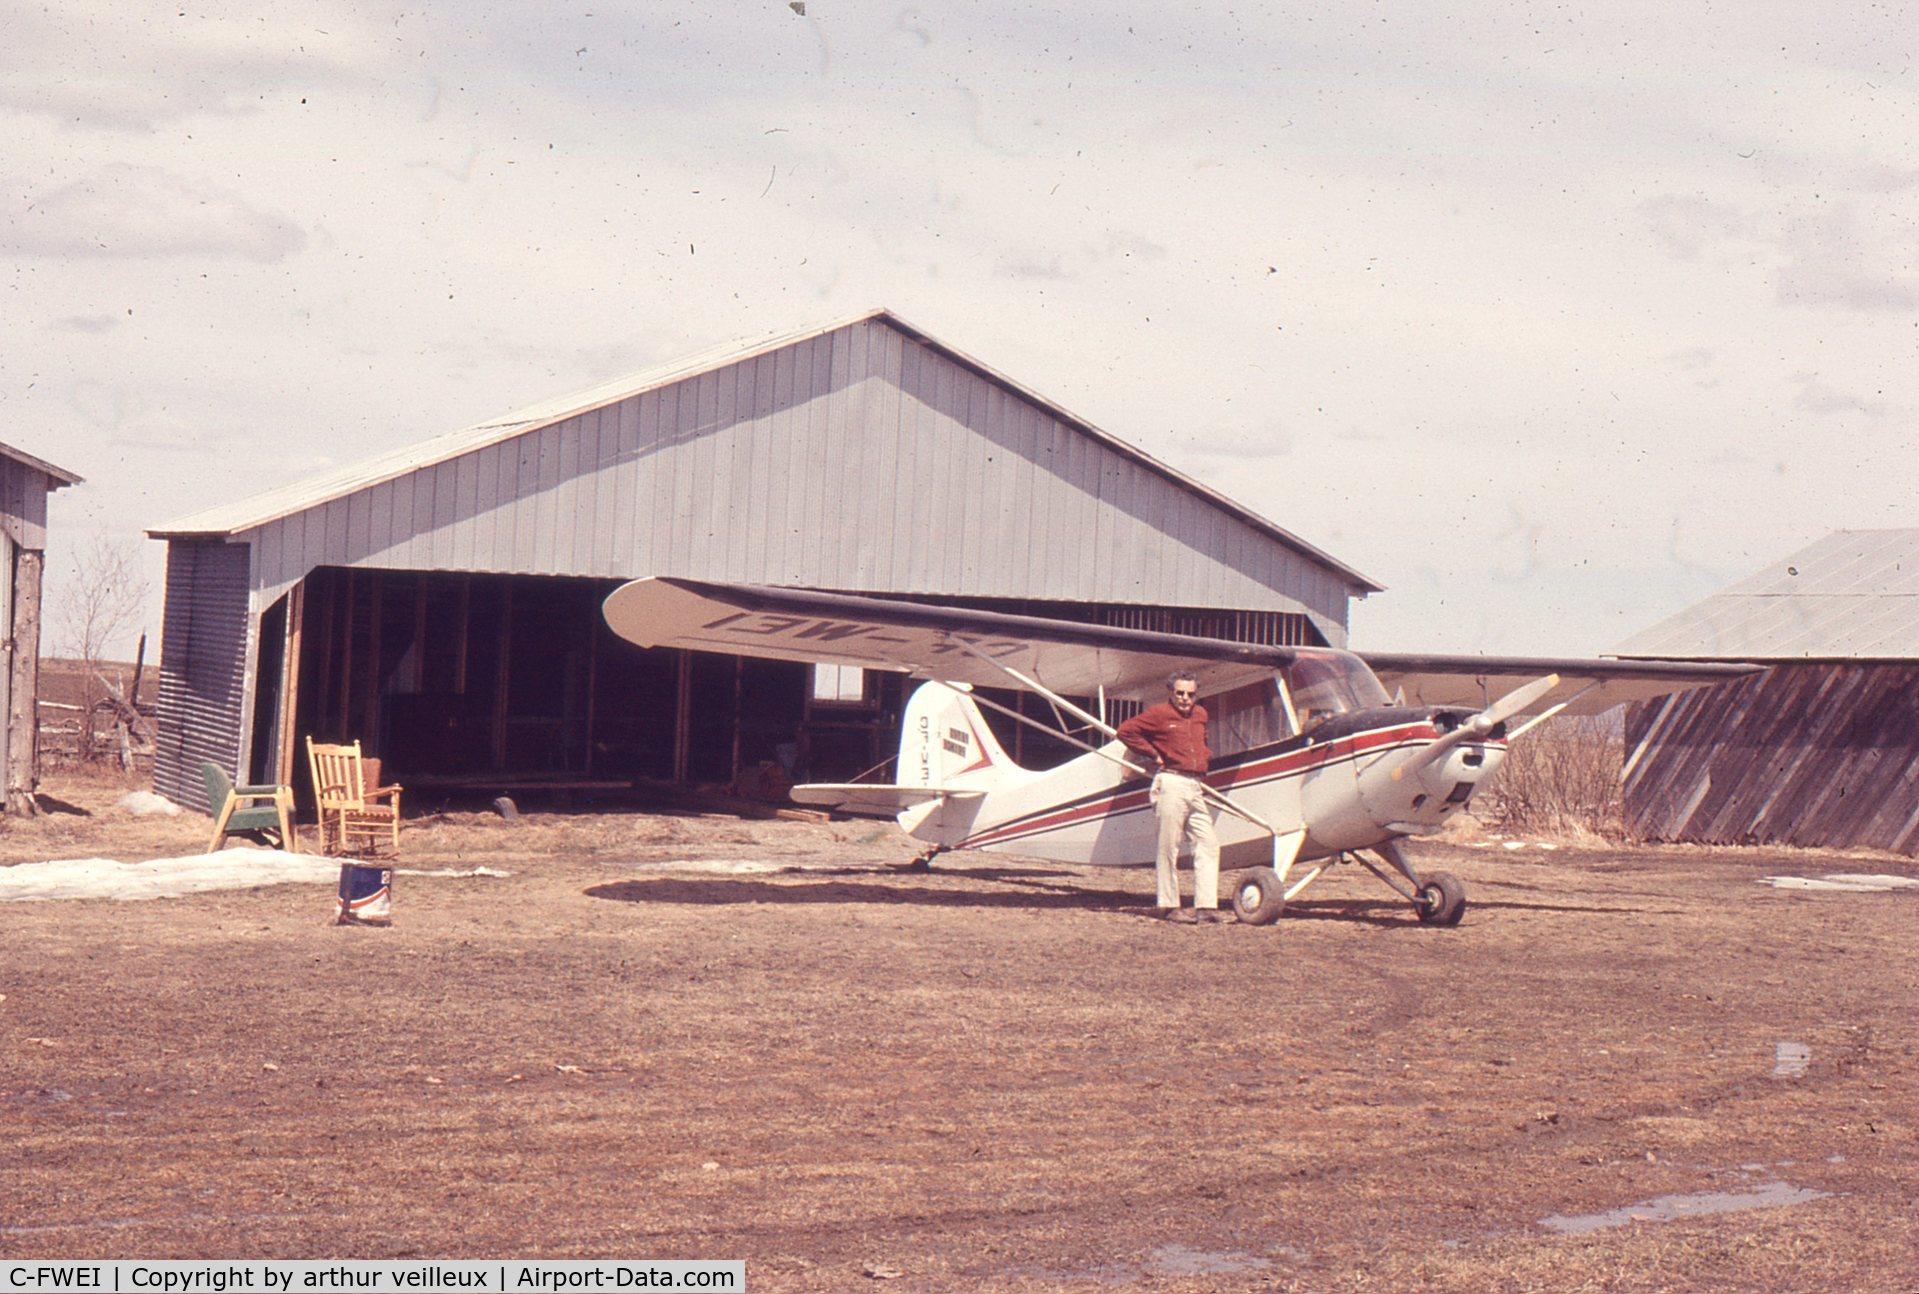 C-FWEI, 1946 Aeronca 7AC Champion C/N 7AC-6133, airplane own by arthur veilleux. picture taken in compton, qc